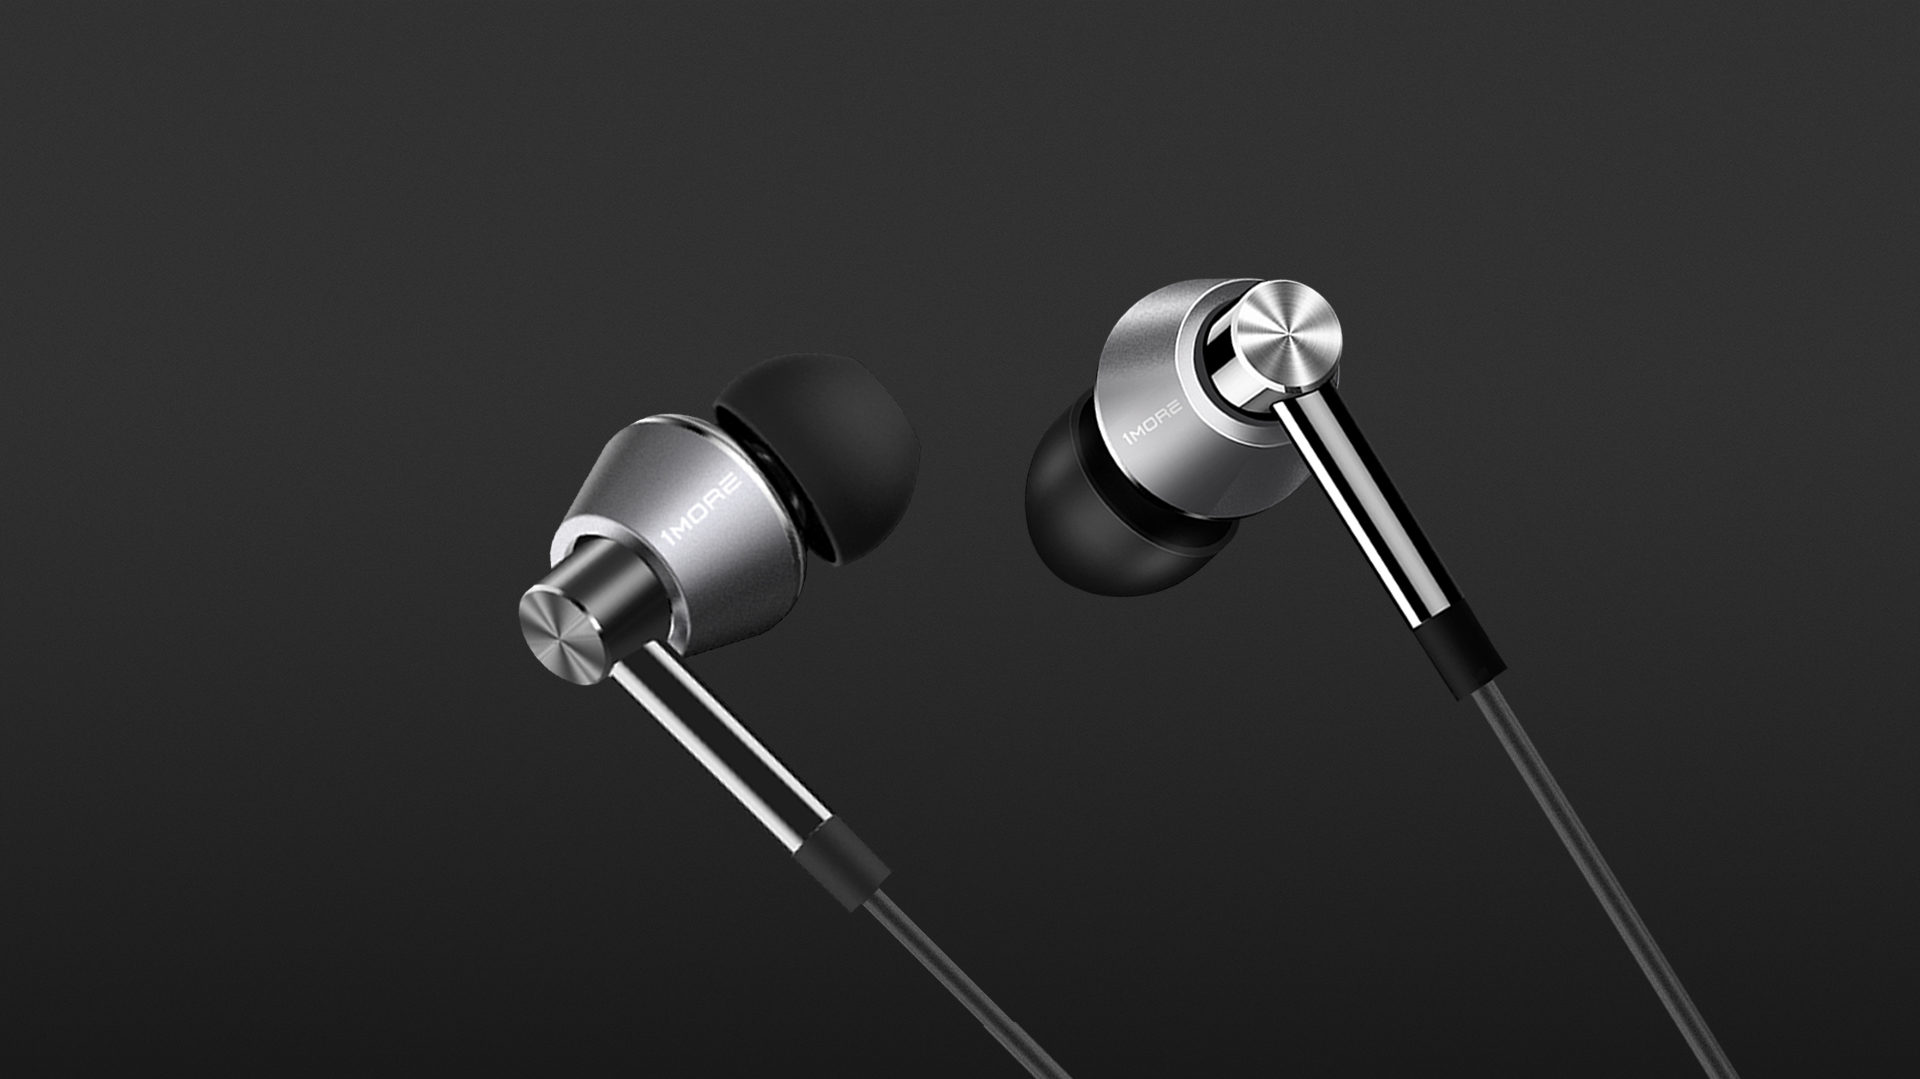 1MORE triple driver BT in ear headphones bluetooth earphones wireless sound quality with microphone E1001BT %20(3)